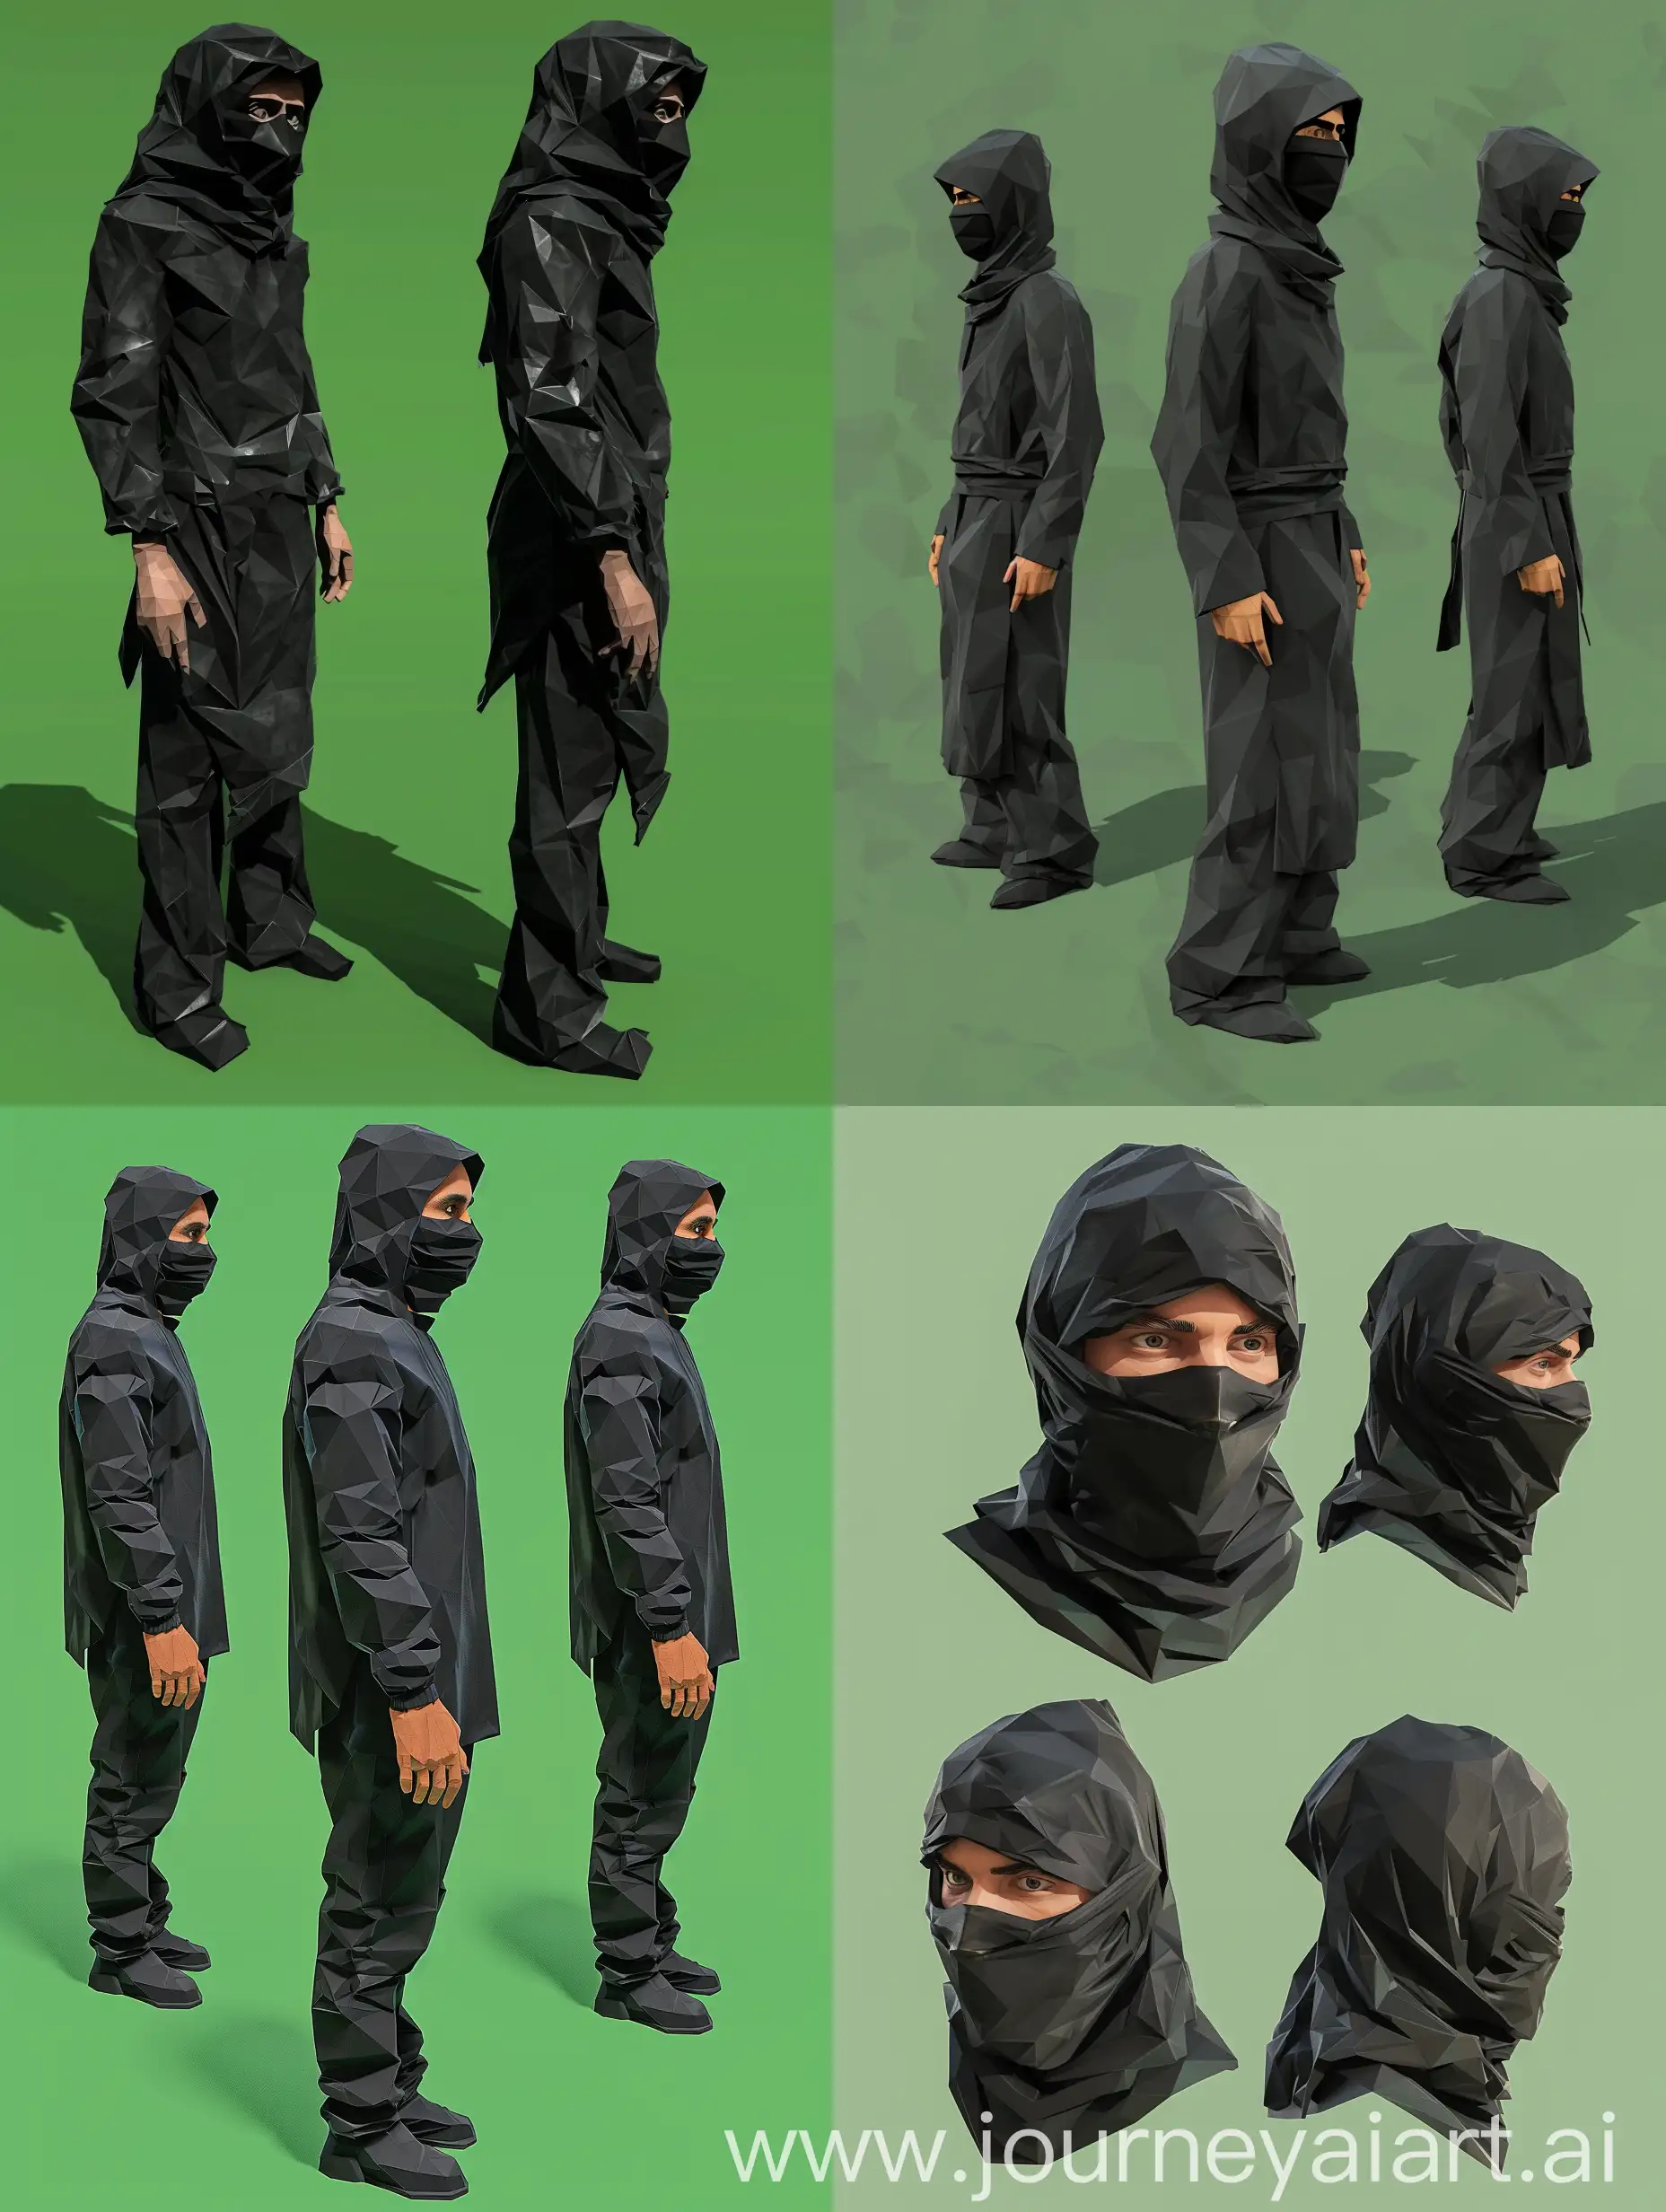 Low poly model in the blender of a man in his 30s in a black mask that covers the nose and mouth and a black hood on a green background in 3 different positions: front, back and side in full height from head to toe